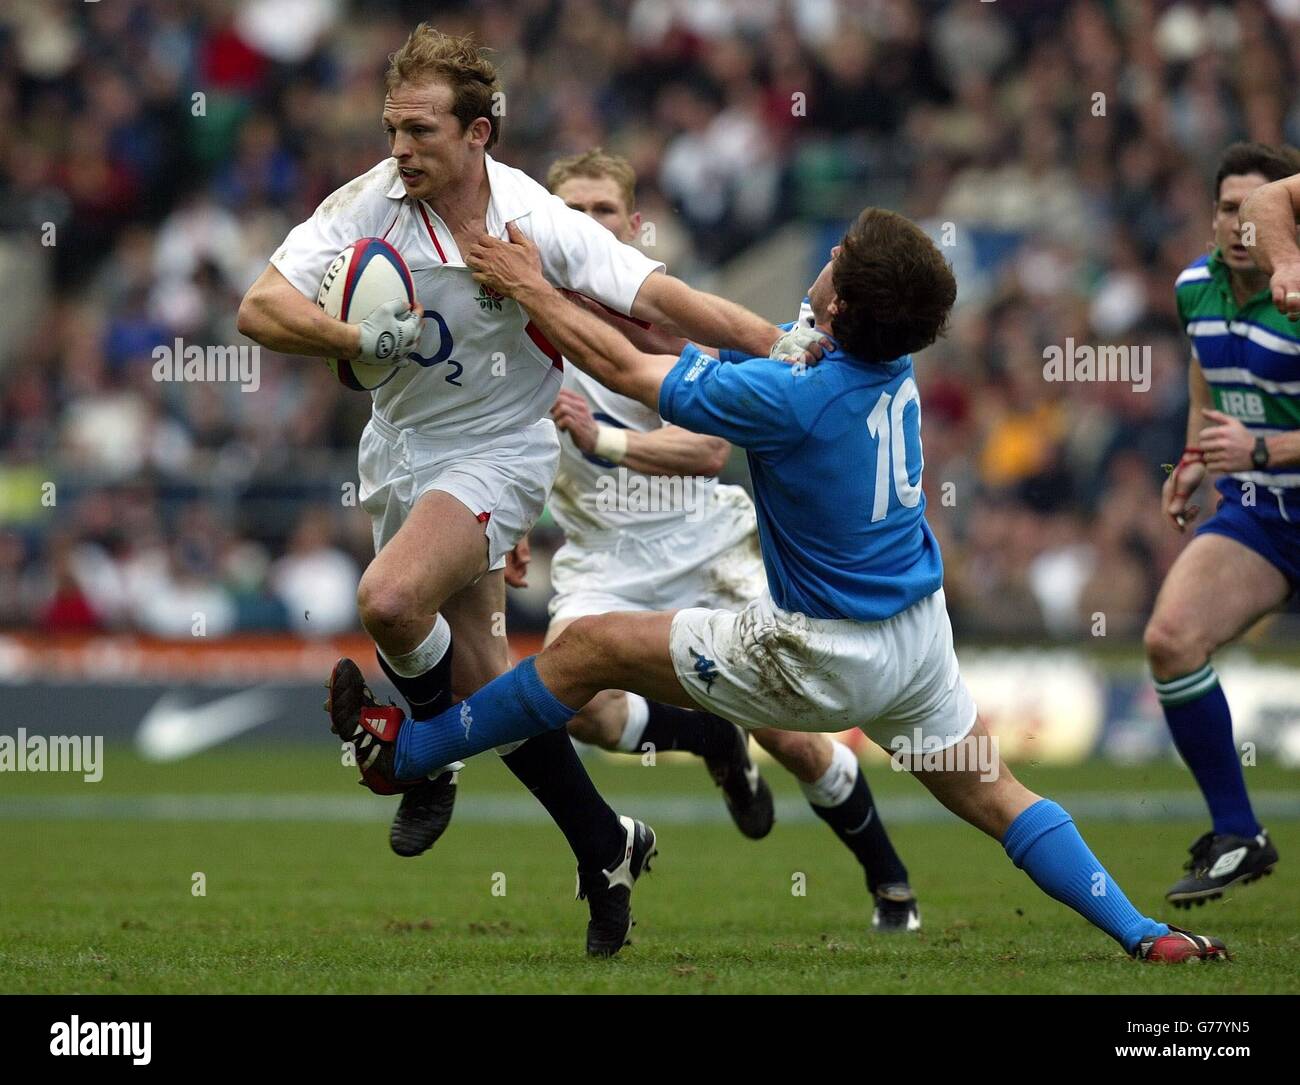 RBS 6 Nations - England v Italy. England's Matt Dawson hands off the tackle of Italy's Ramiro Pez during their RBS 6 Nations match at Twickenham. Stock Photo